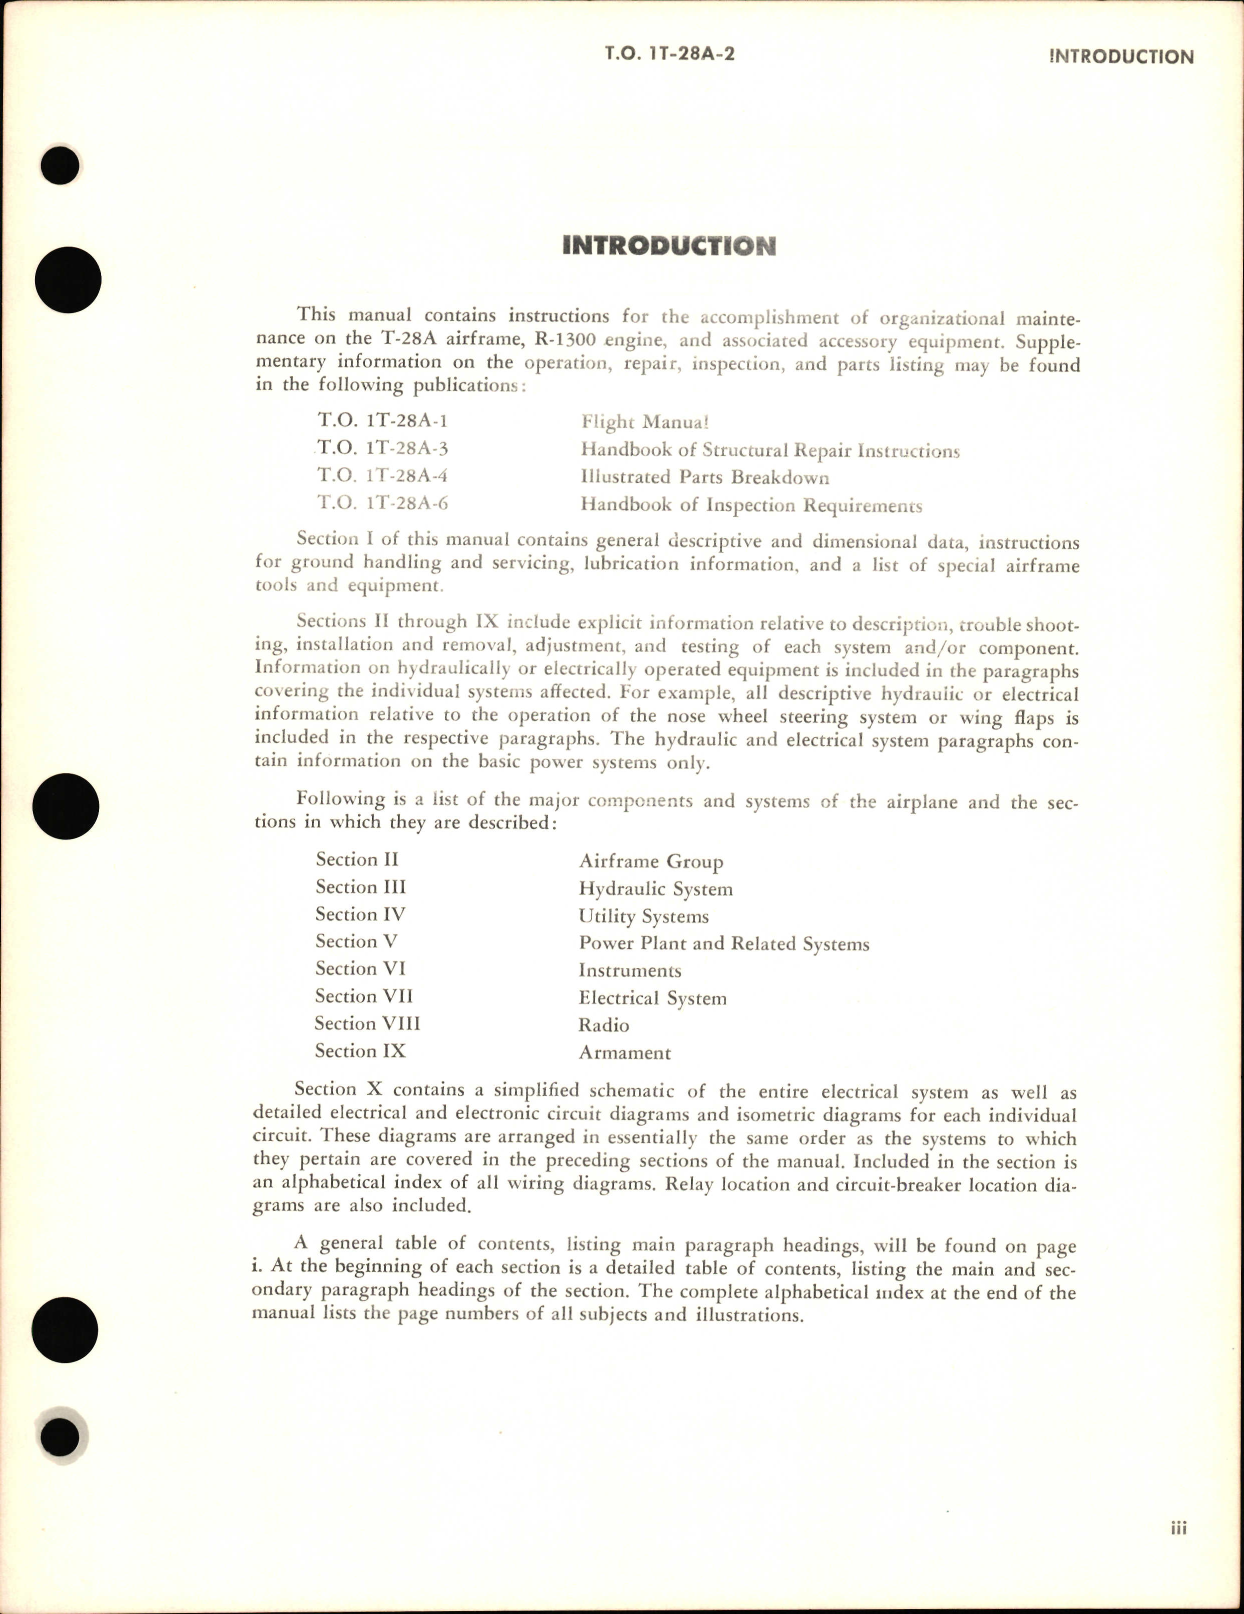 Sample page 7 from AirCorps Library document: Maintenance Manual for T-28A and T-28D